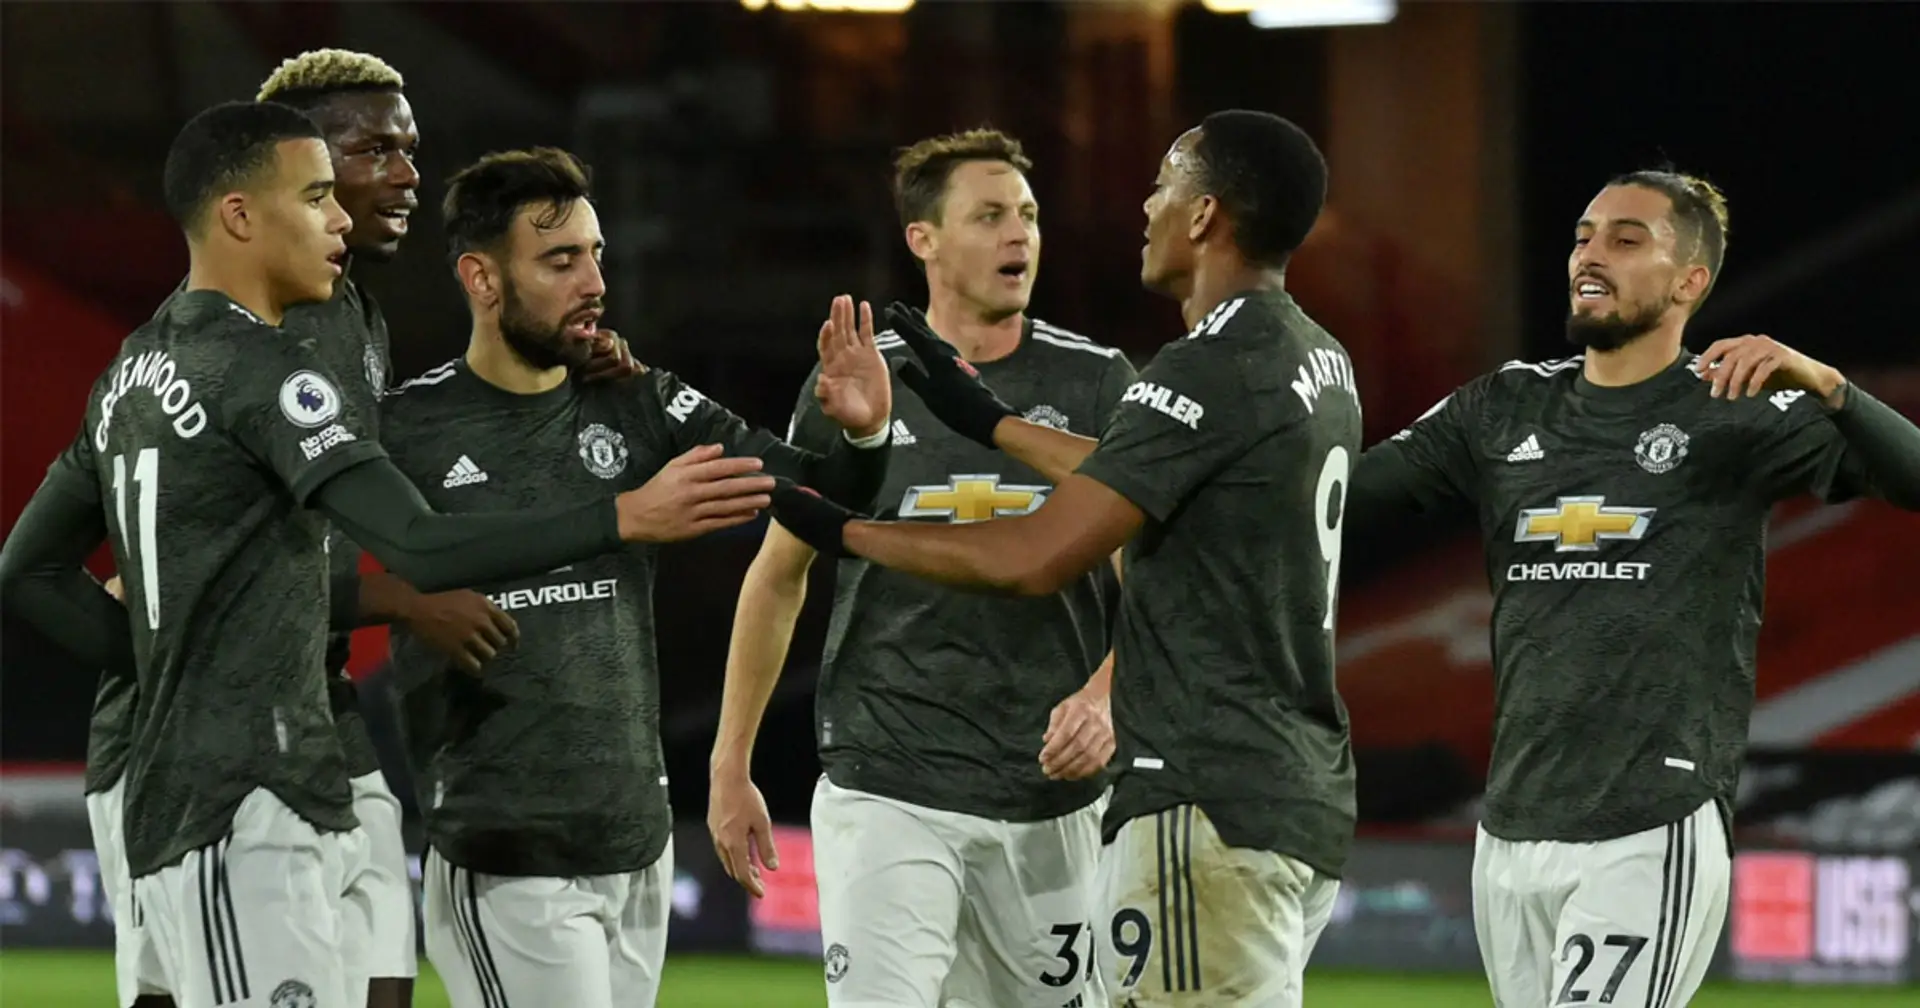 Man United vs Sheffield United: team news, probable line-ups, score predictions & more – preview